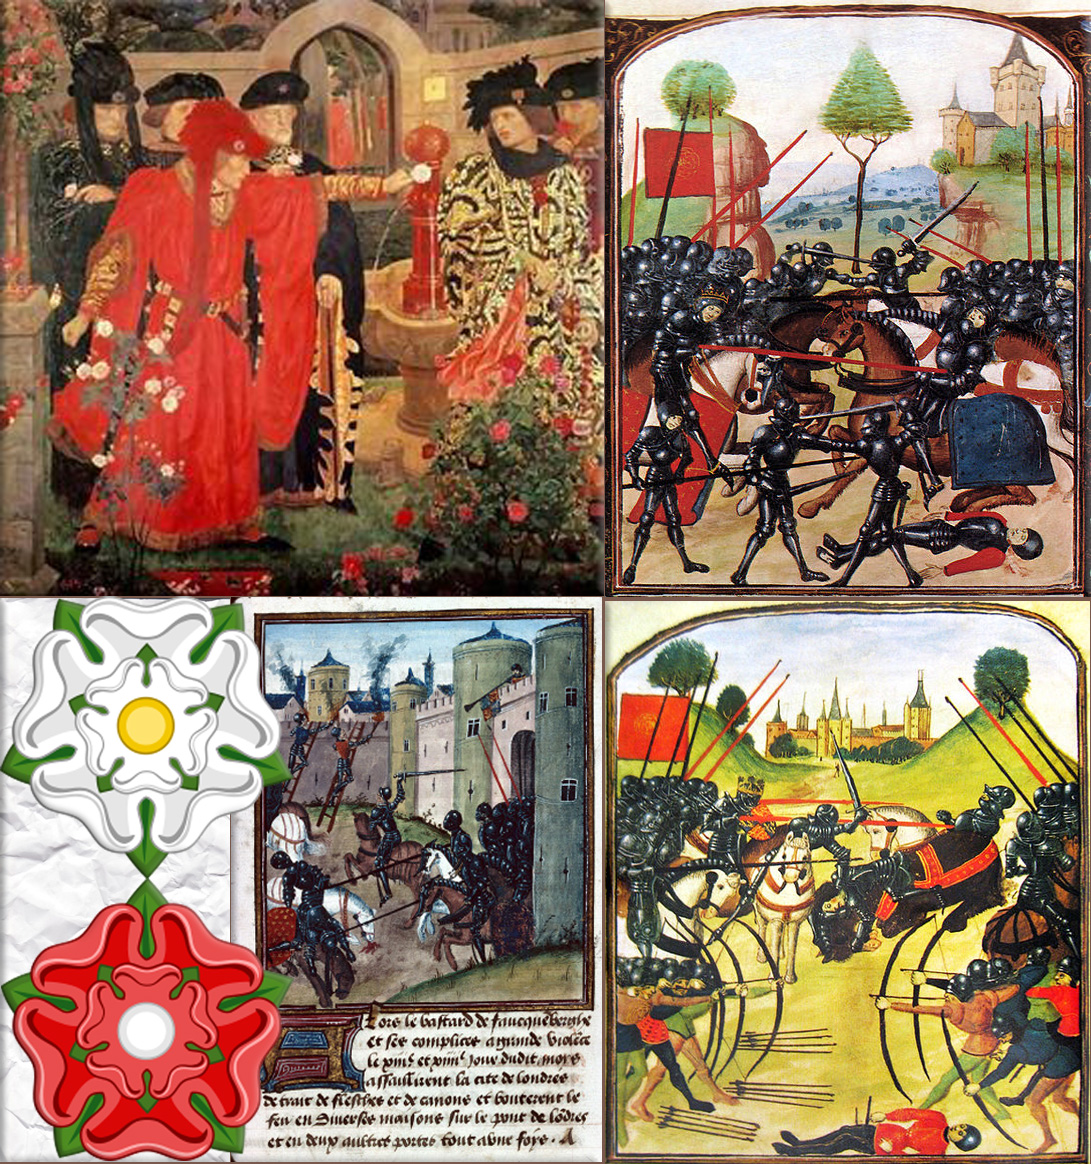 Wars of the Roses: a series of dynastic wars fought between supporters of two rival branches of the royal House of Plantagenet; the houses of Lancaster and York (whose heraldic symbols were the 'red' and the 'white' rose, respectively) for the throne of England